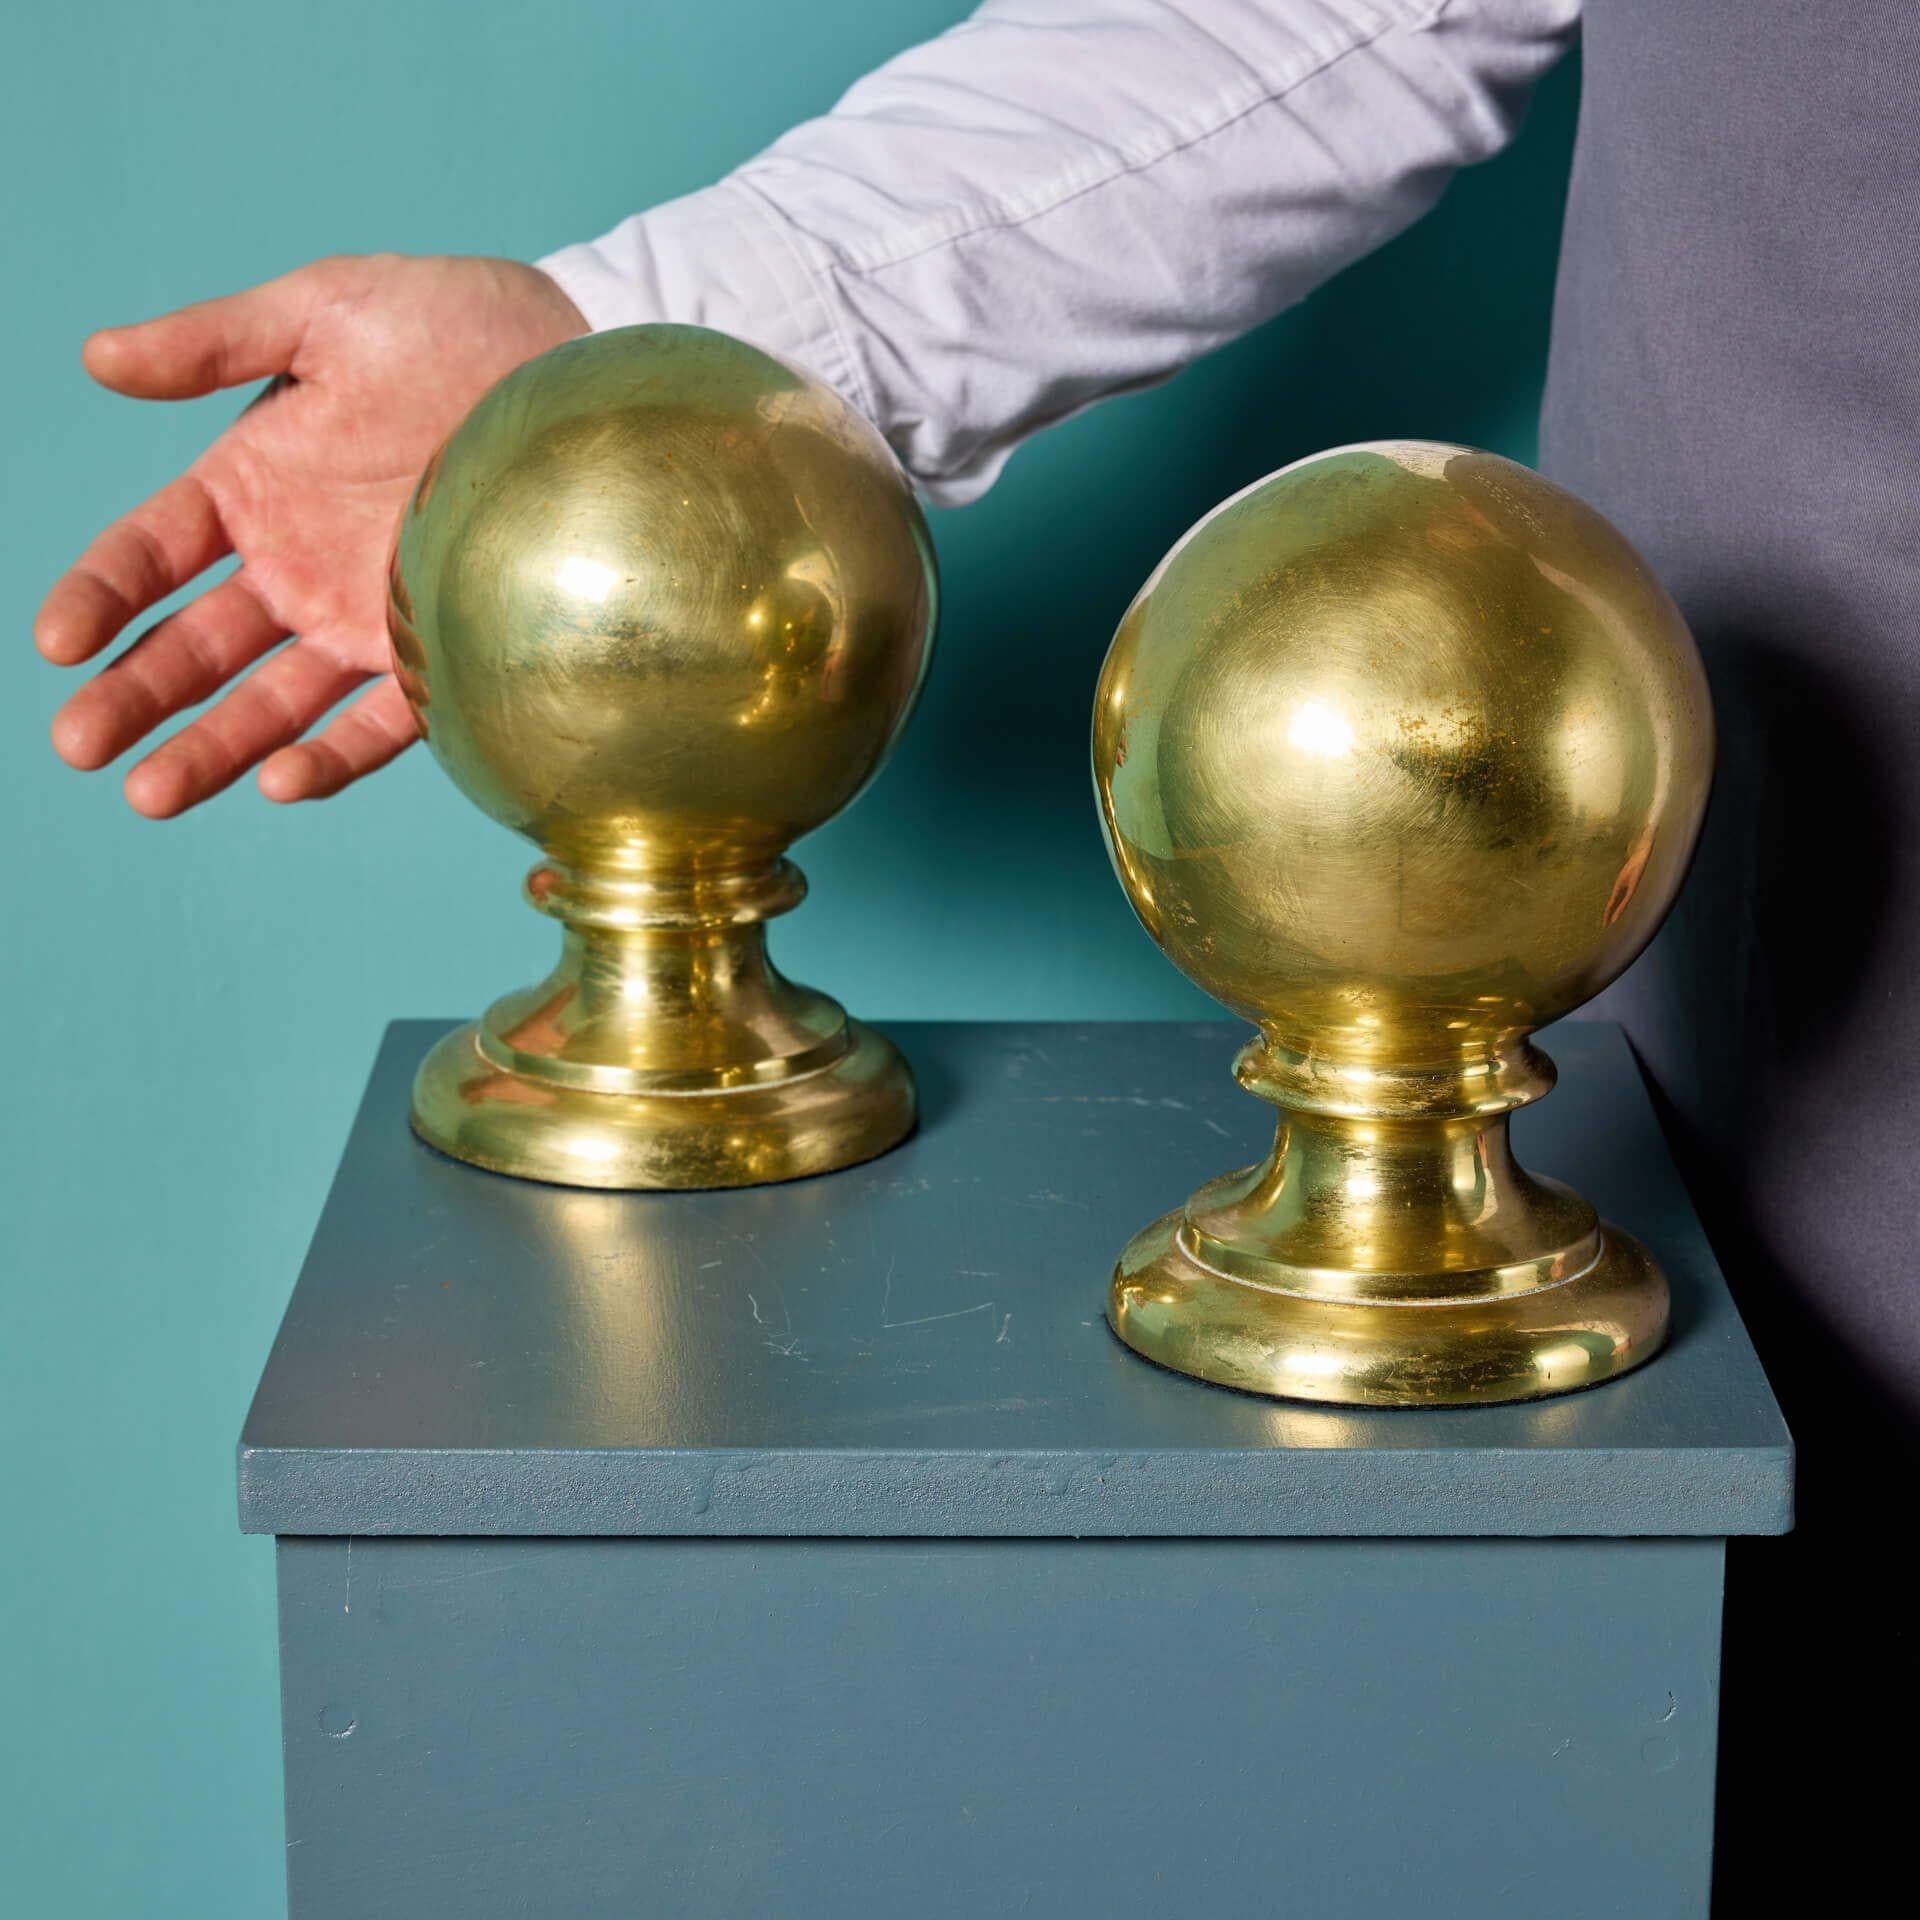 A pair of large antique English cast brass ball finials, salvaged from a stables in Newmarket, England.

With their bold brass colour and highly polished finish, this impressive pair of finials would make a striking display piece in any home,